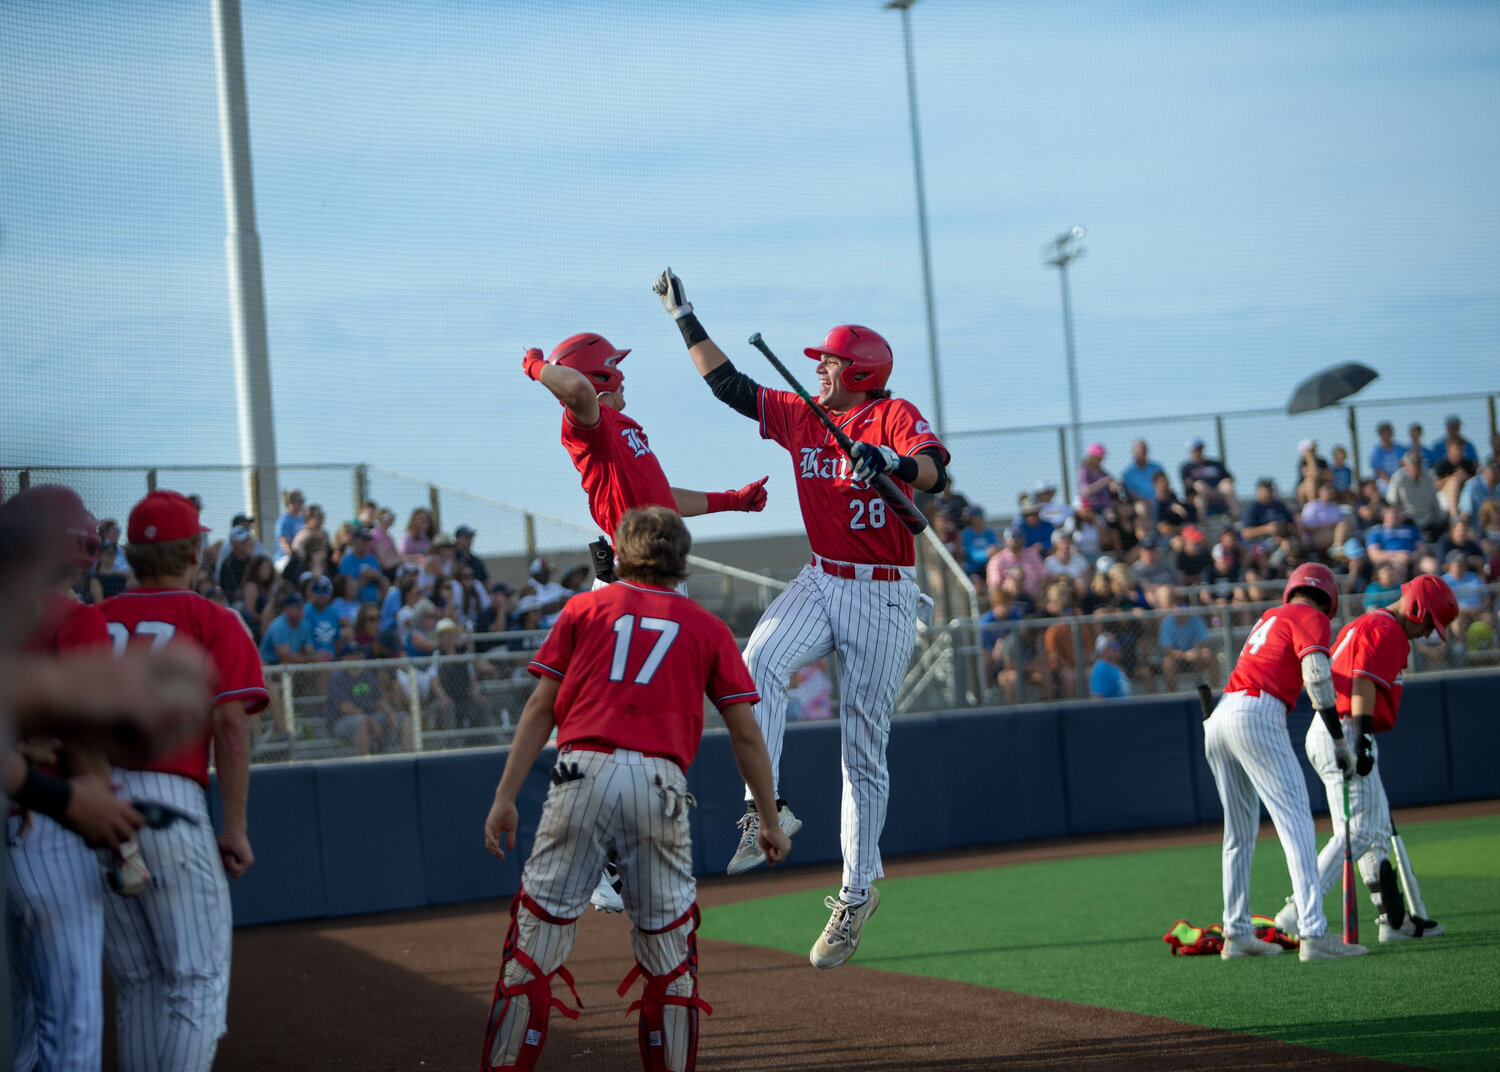 Cole Kaase celebrates after scoring a run during Saturday's Regional Quarterfinal between Katy and Tompkins at Cy-Springs.